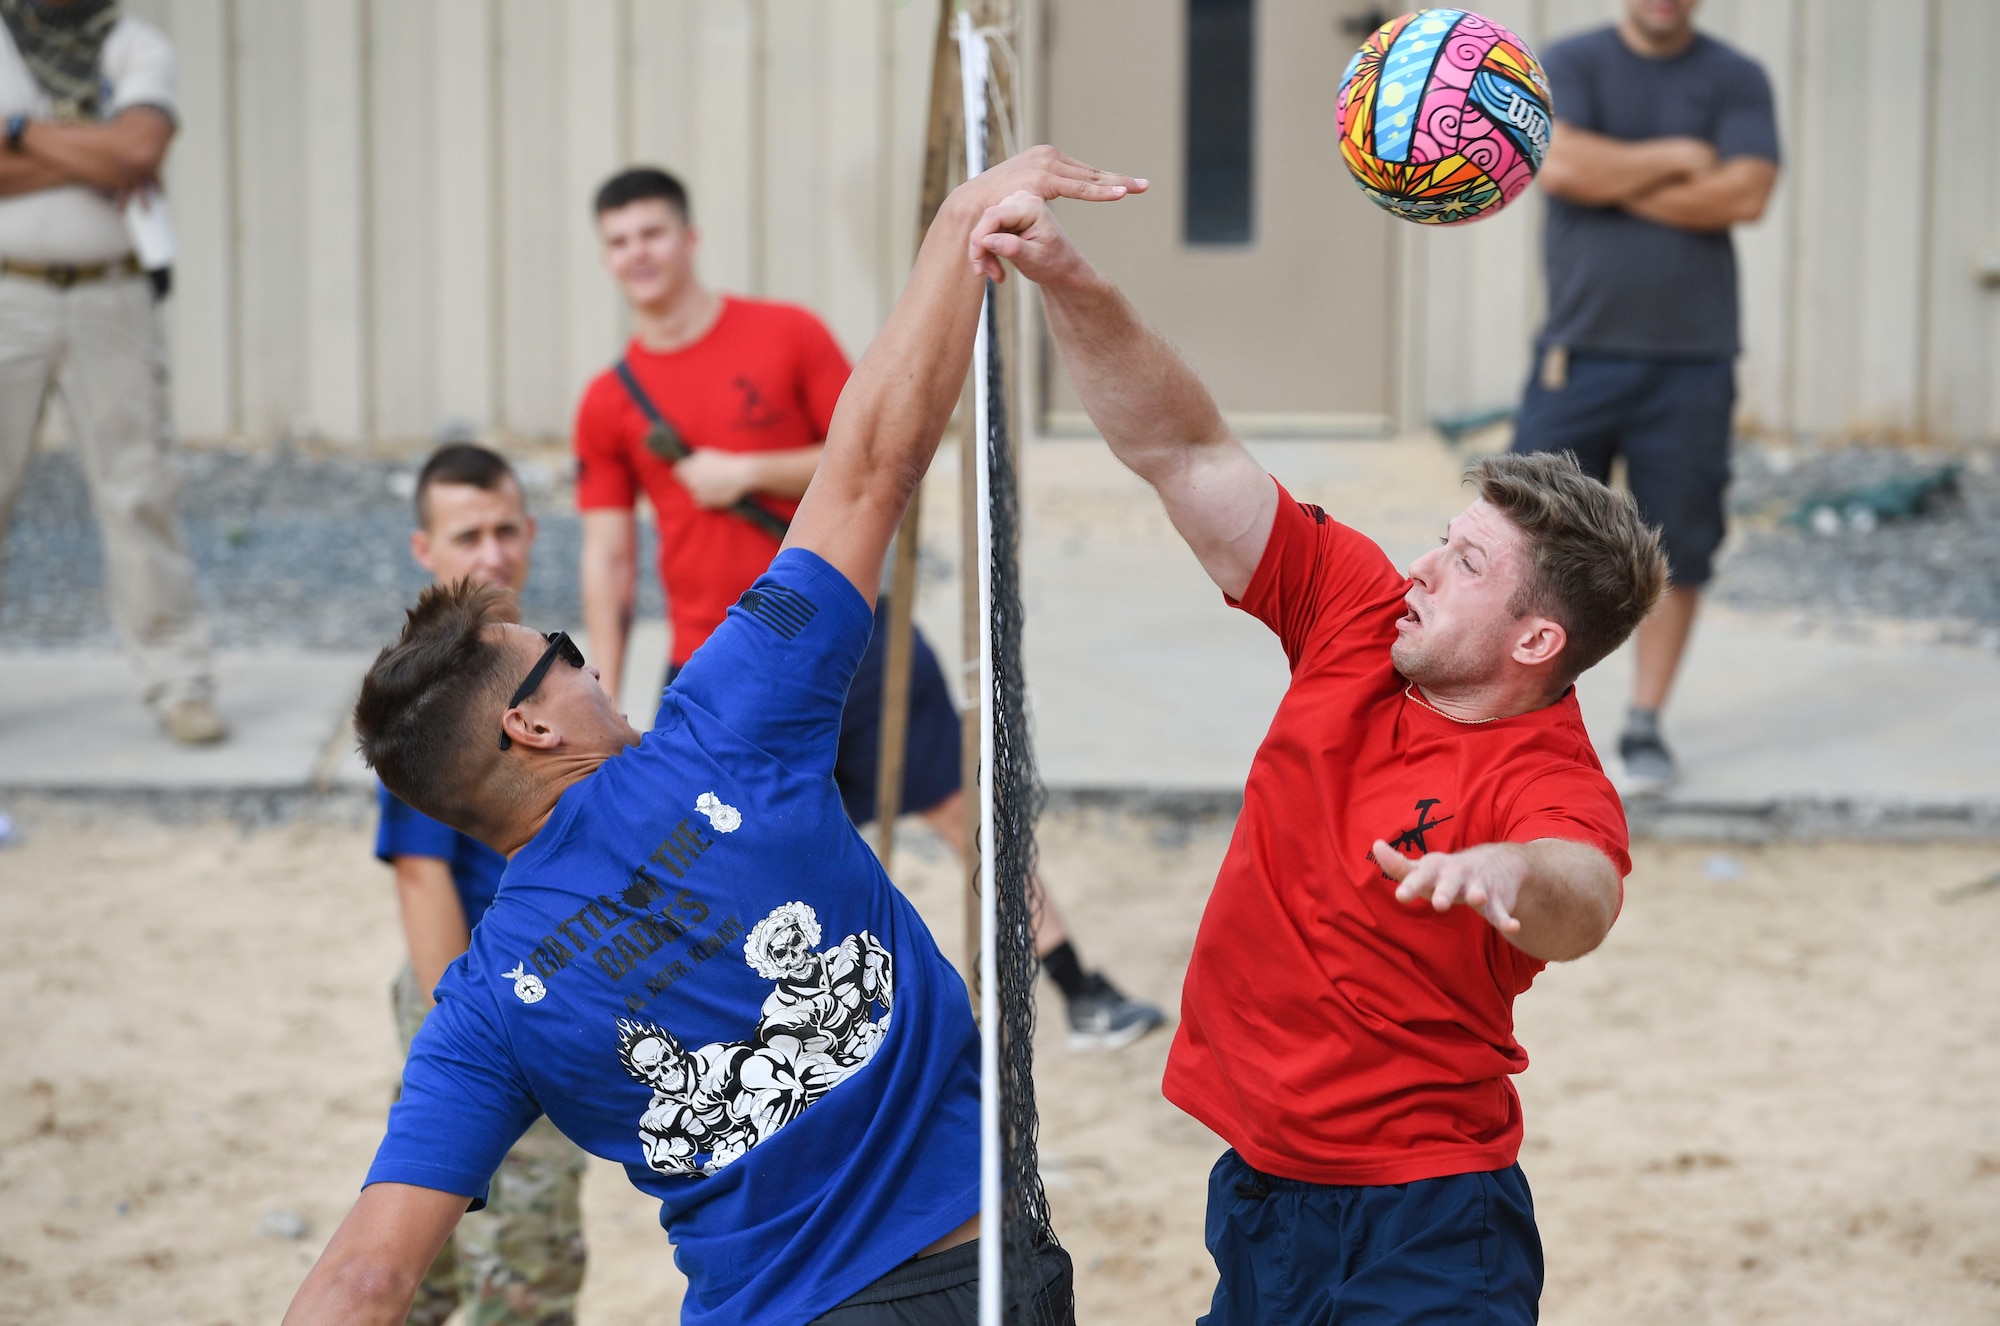 U.S. Air Force Airmen assigned to the 407th Expeditionary Security Forces Squadron and the 407th Civil Engineer Squadron play volleyball during the Battle of the Badges event at Ahmed Al Jaber Air Base, Kuwait, Nov. 11, 2020.